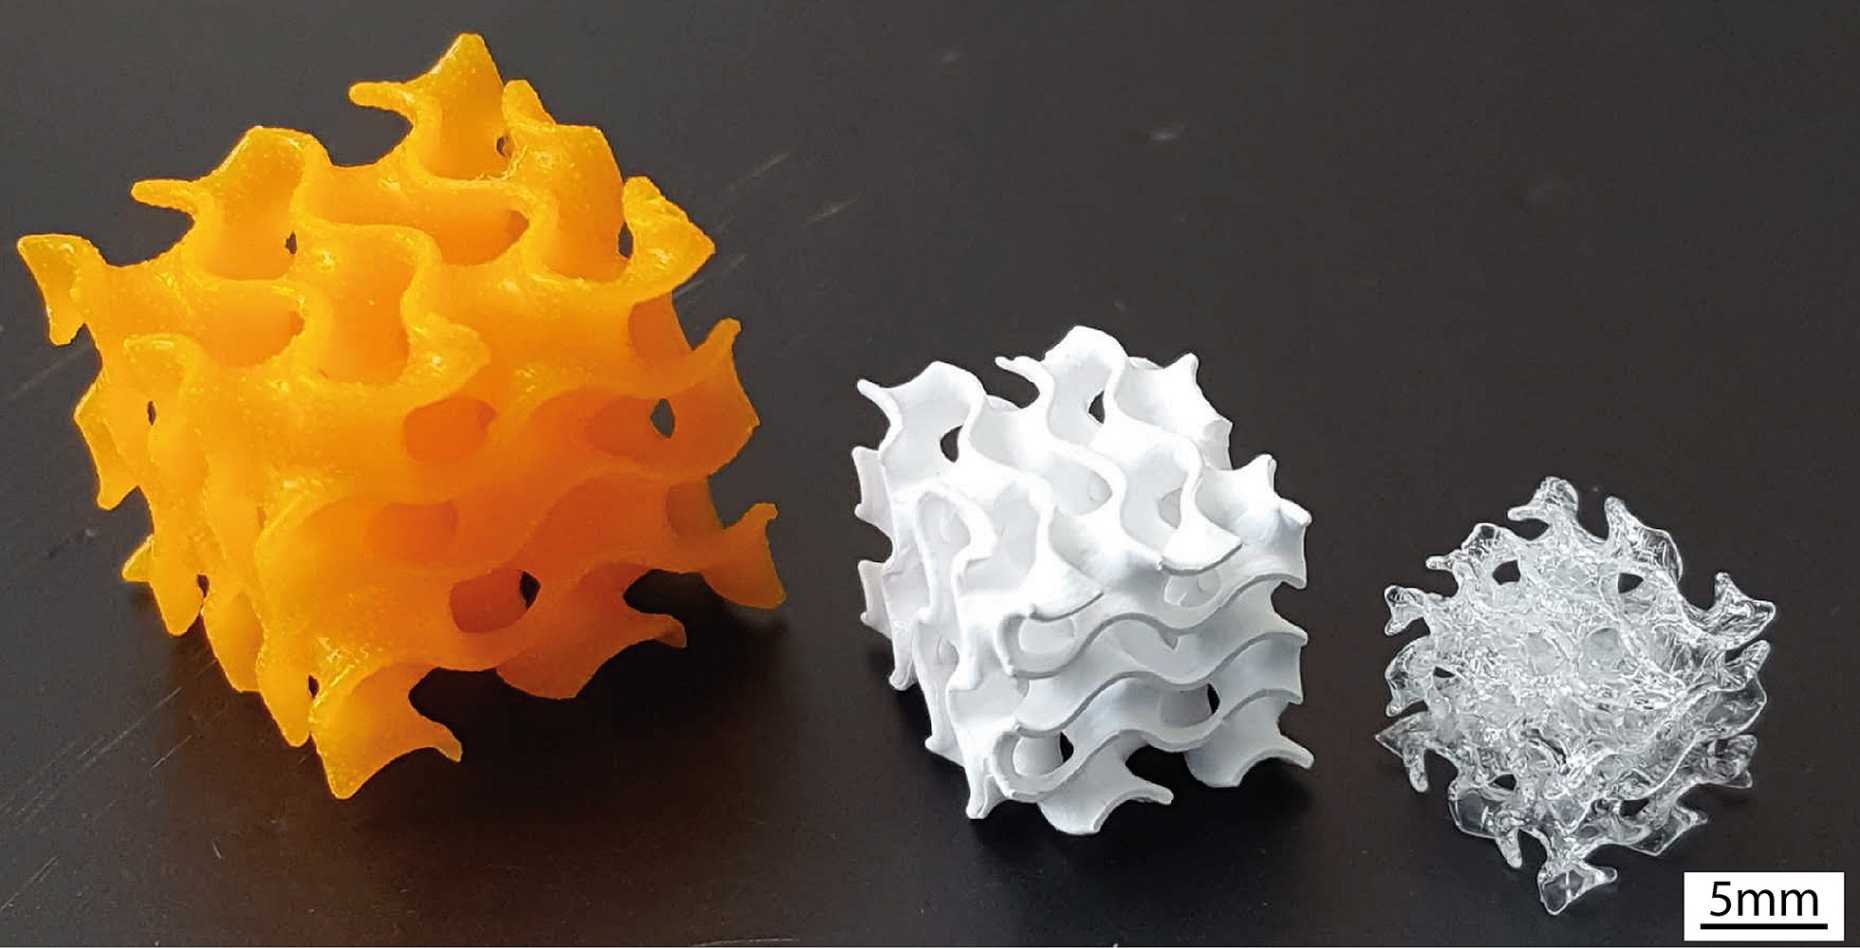 On the left, the 3D-printed block is orange and plastic-looking. In the center, the block is smaller and white. On the right, the block is smaller and glassy